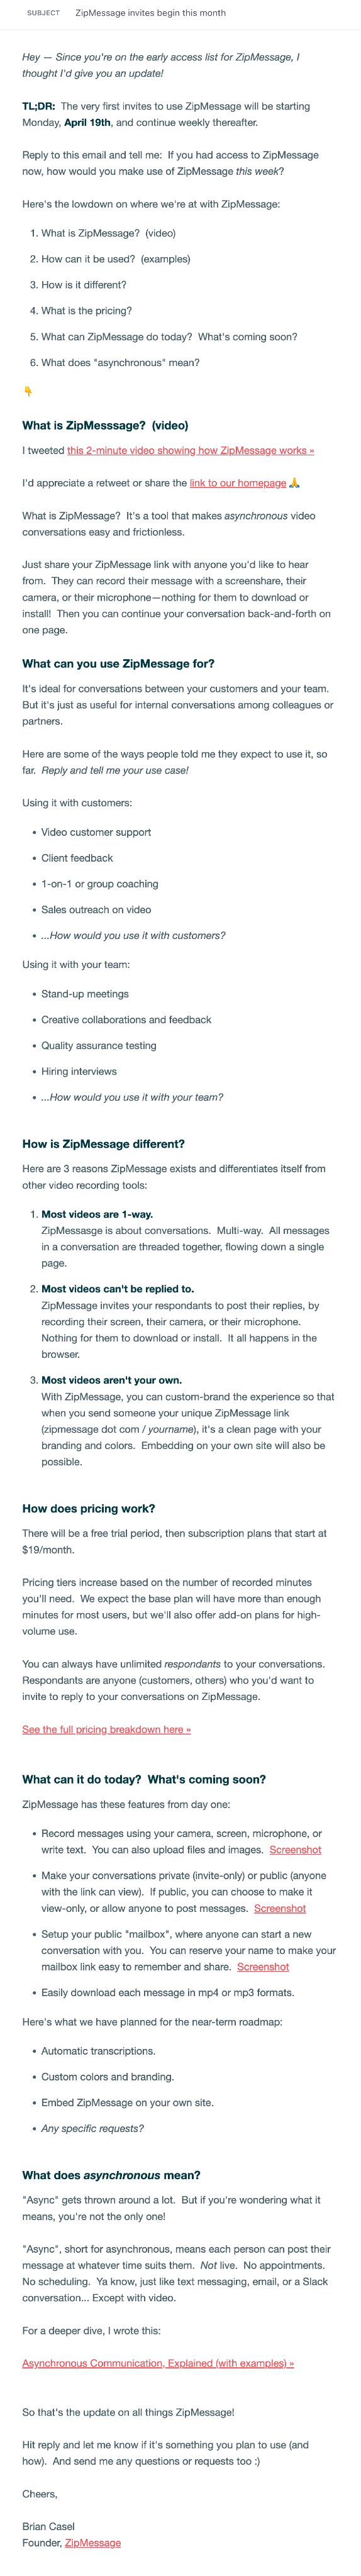 SaaS Product Launch Emails: Screenshot of ZipMessage's launch email